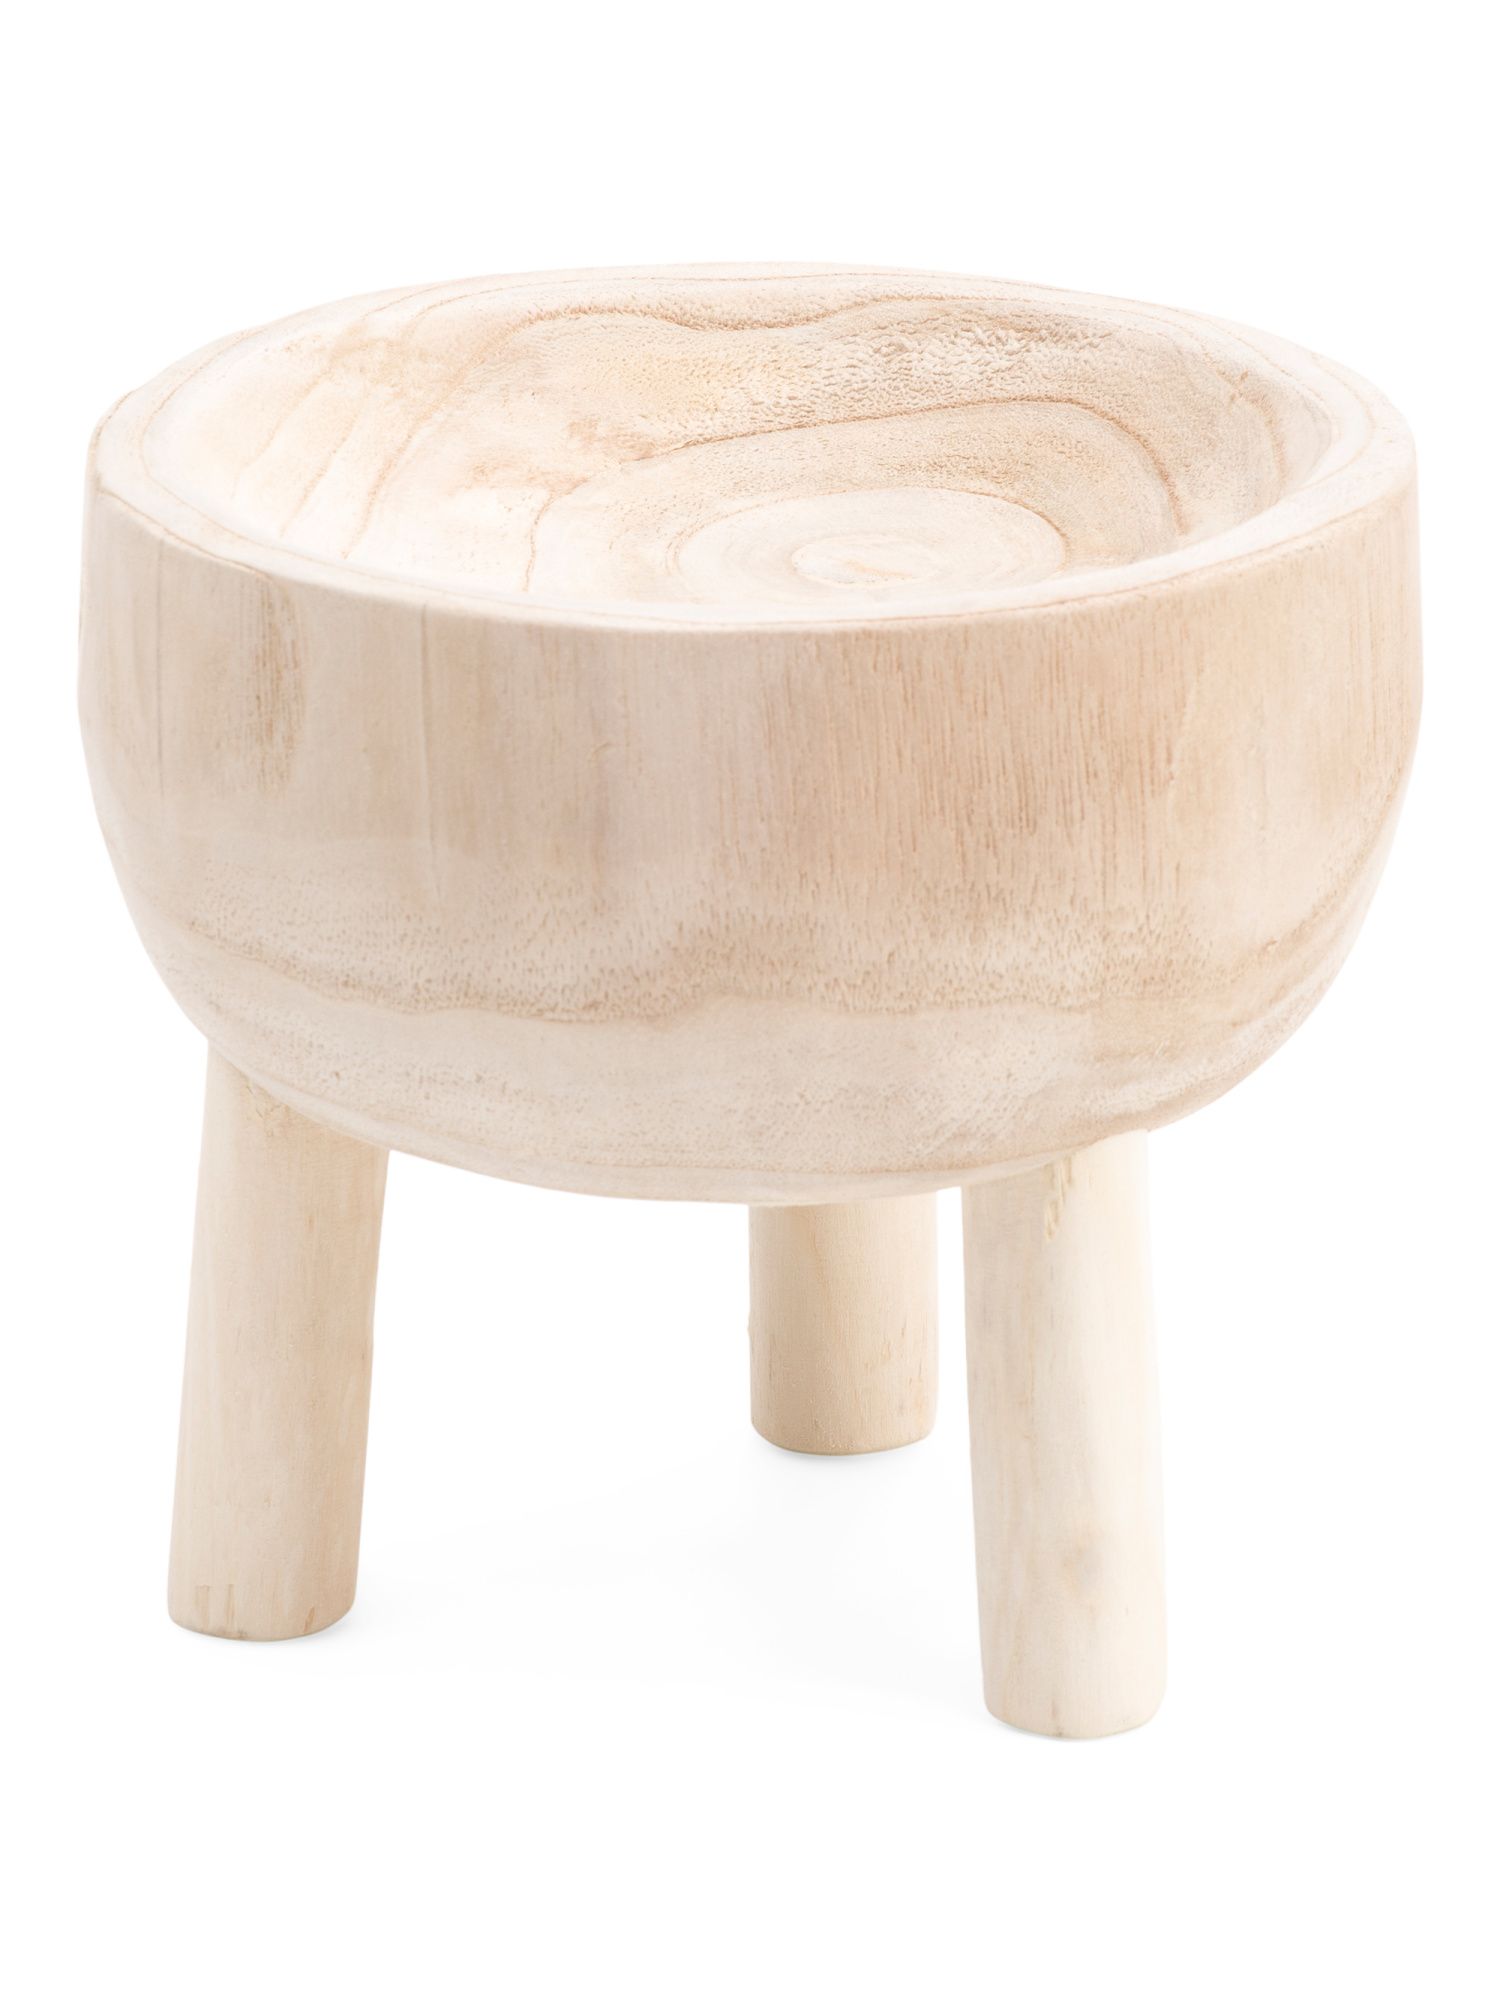 8in Wood Bowl With 3 Legs | TJ Maxx